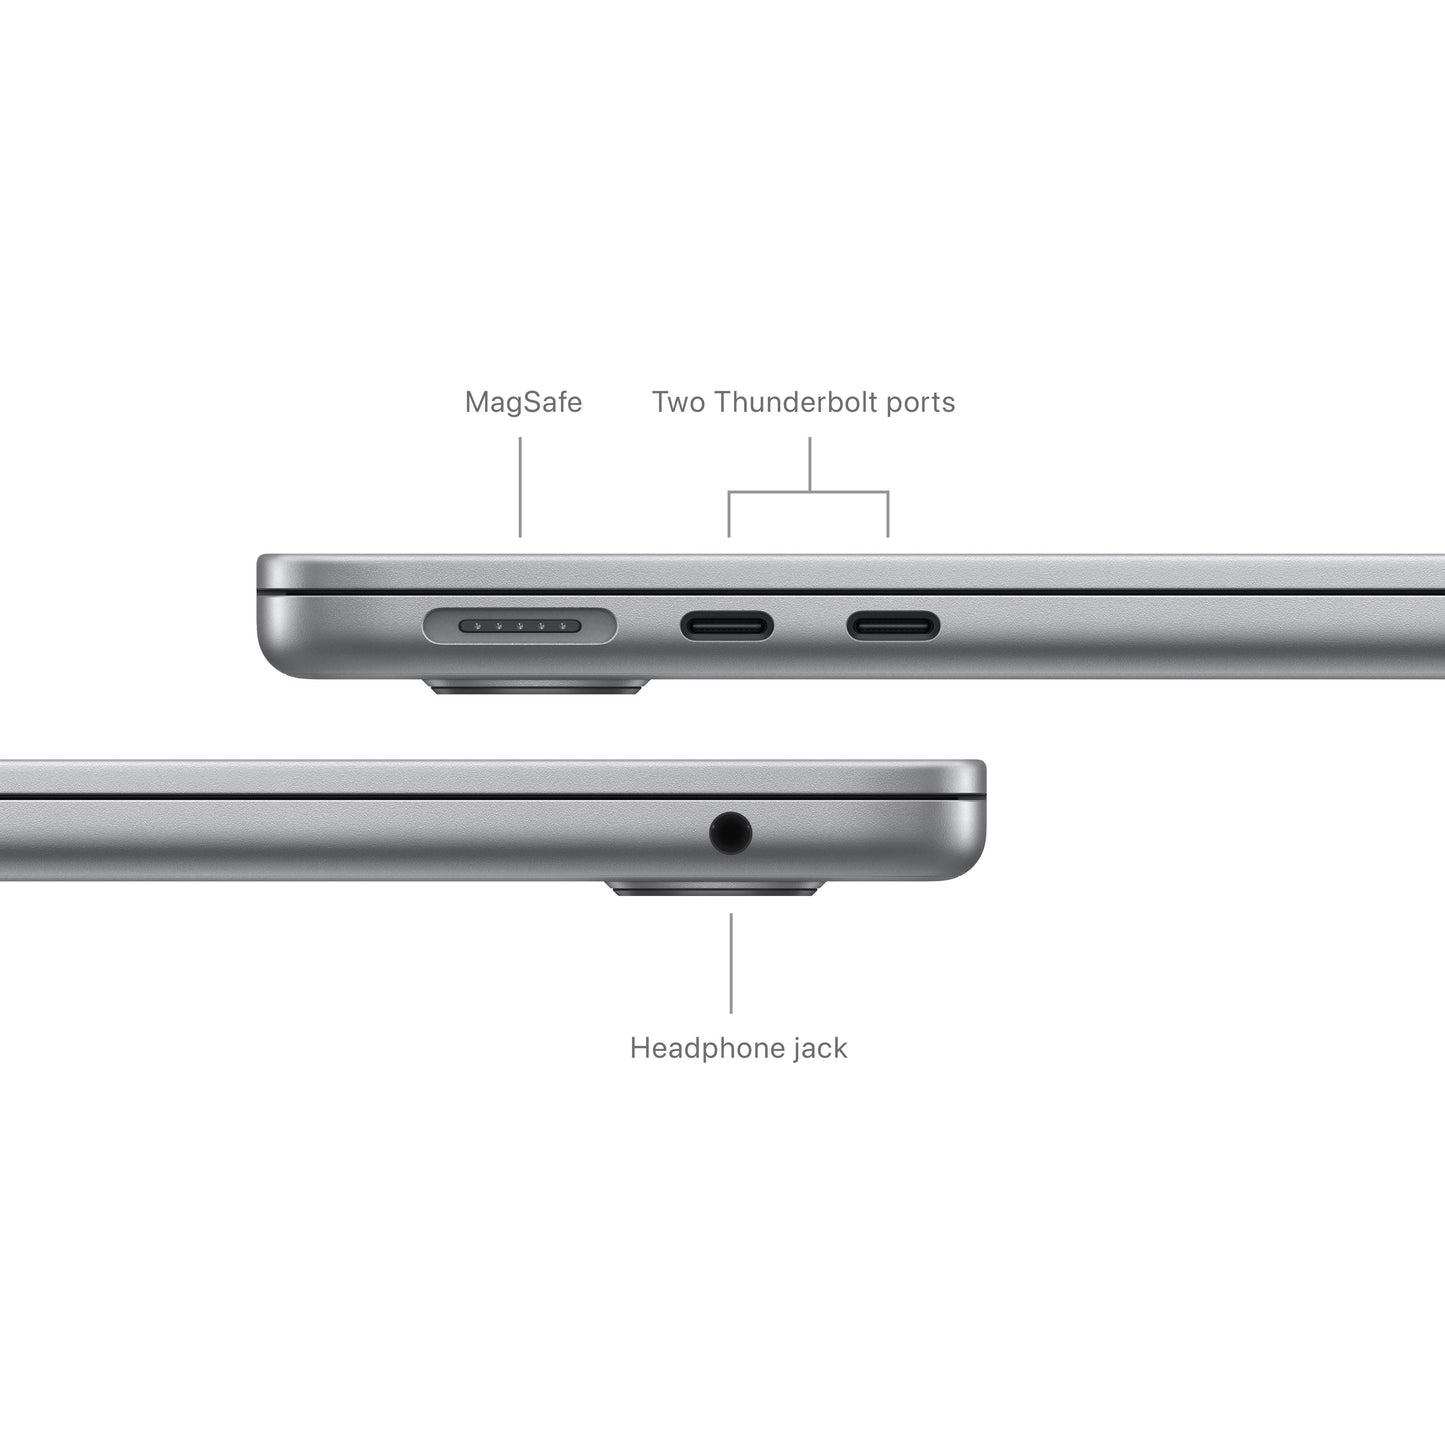 13-inch MacBook Air: Apple M3 chip with 8‑core CPU and 8‑core GPU, 256GB SSD - Space Grey